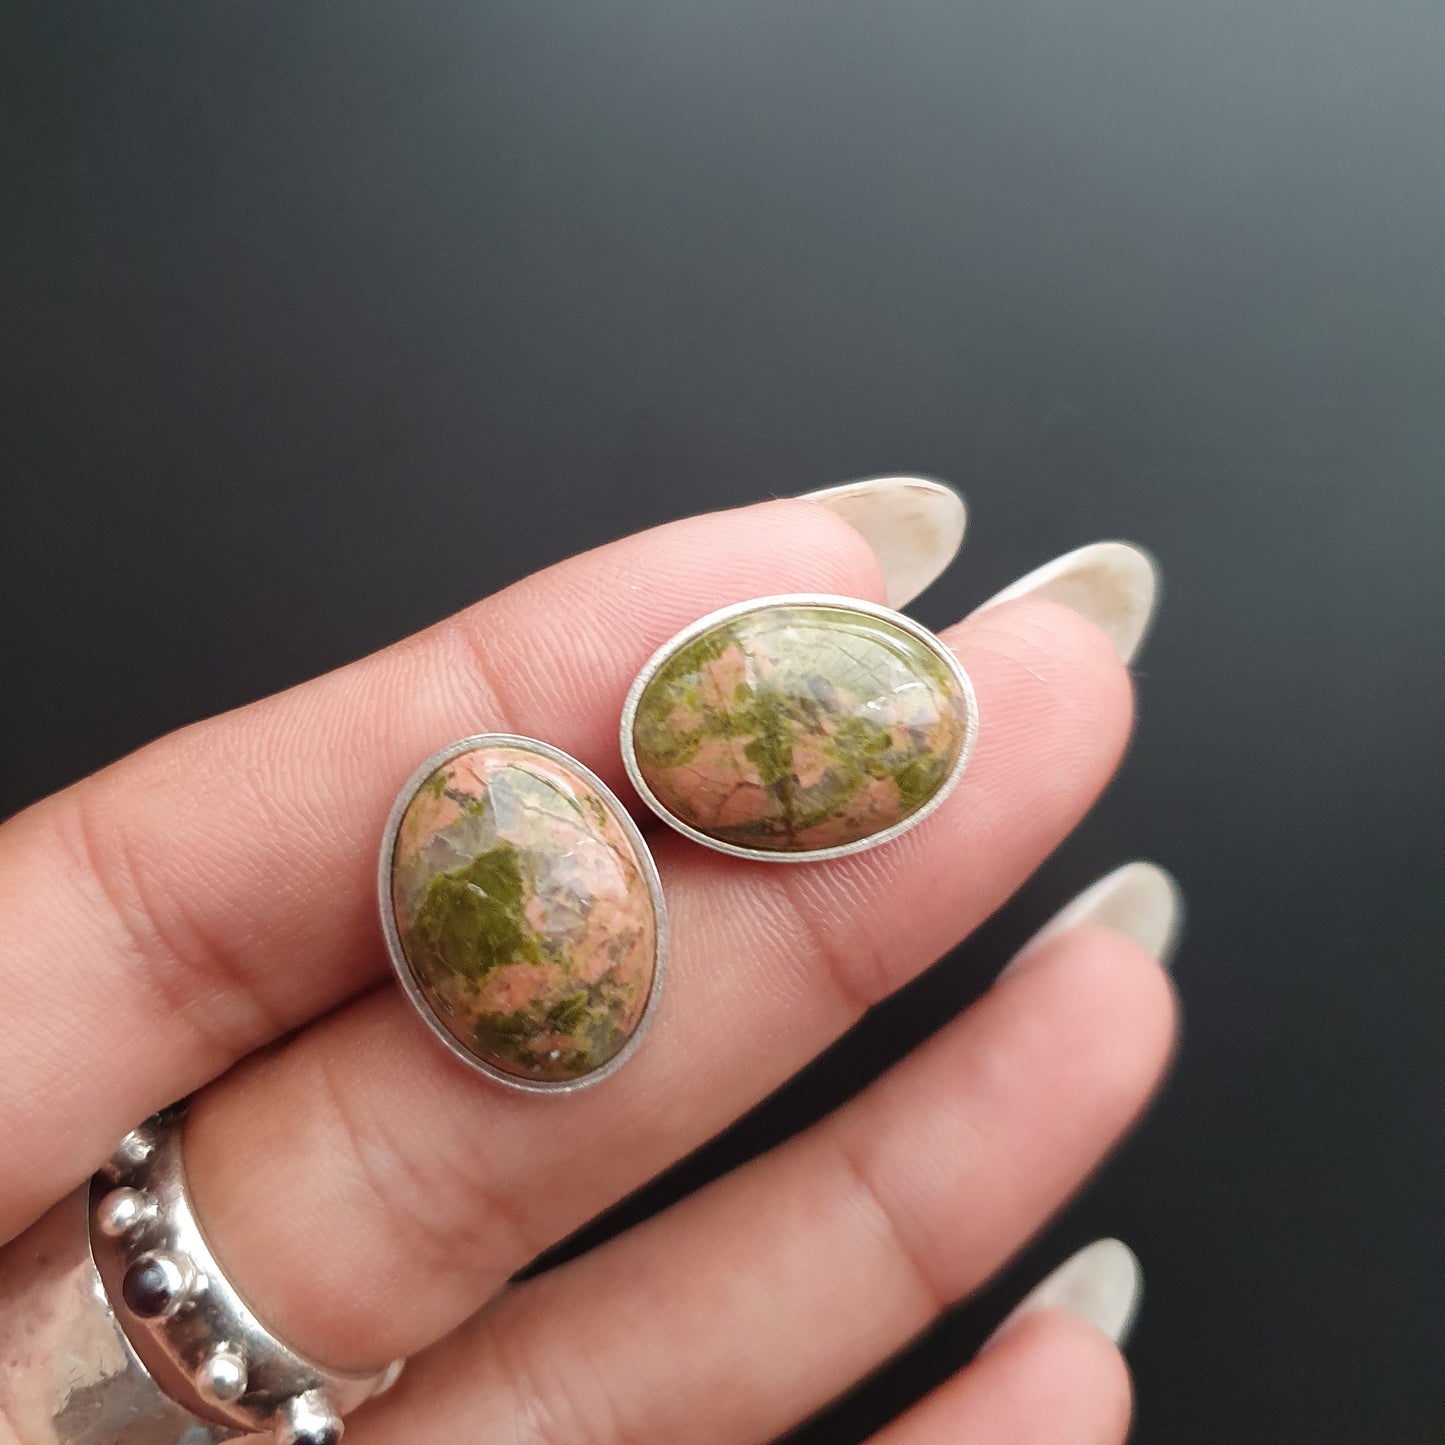 Stud earrings, unakite gemstone, sterling silver, oval,vintage jewelry, unique,gifts,classical, Victorian, dainty jewellery,handmade jewelry